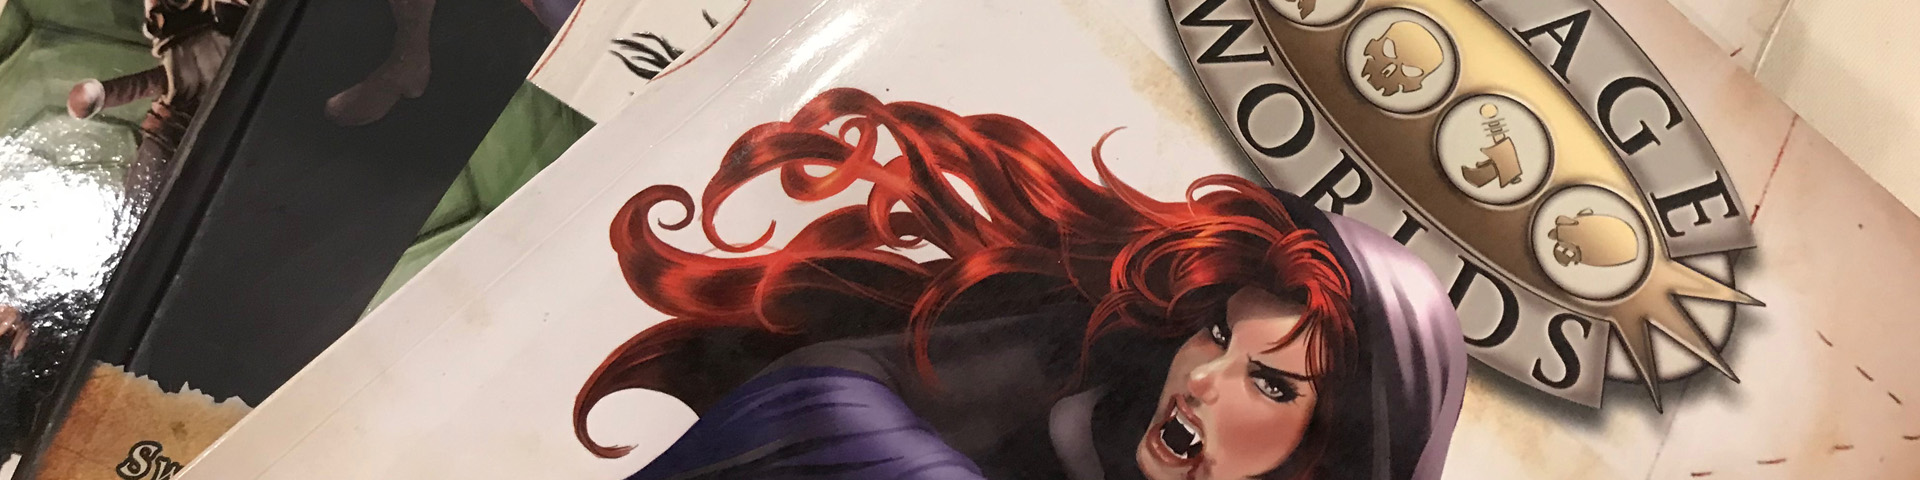 A stack of role-playing game books. A redheaded vampire appears on the cover of one them.